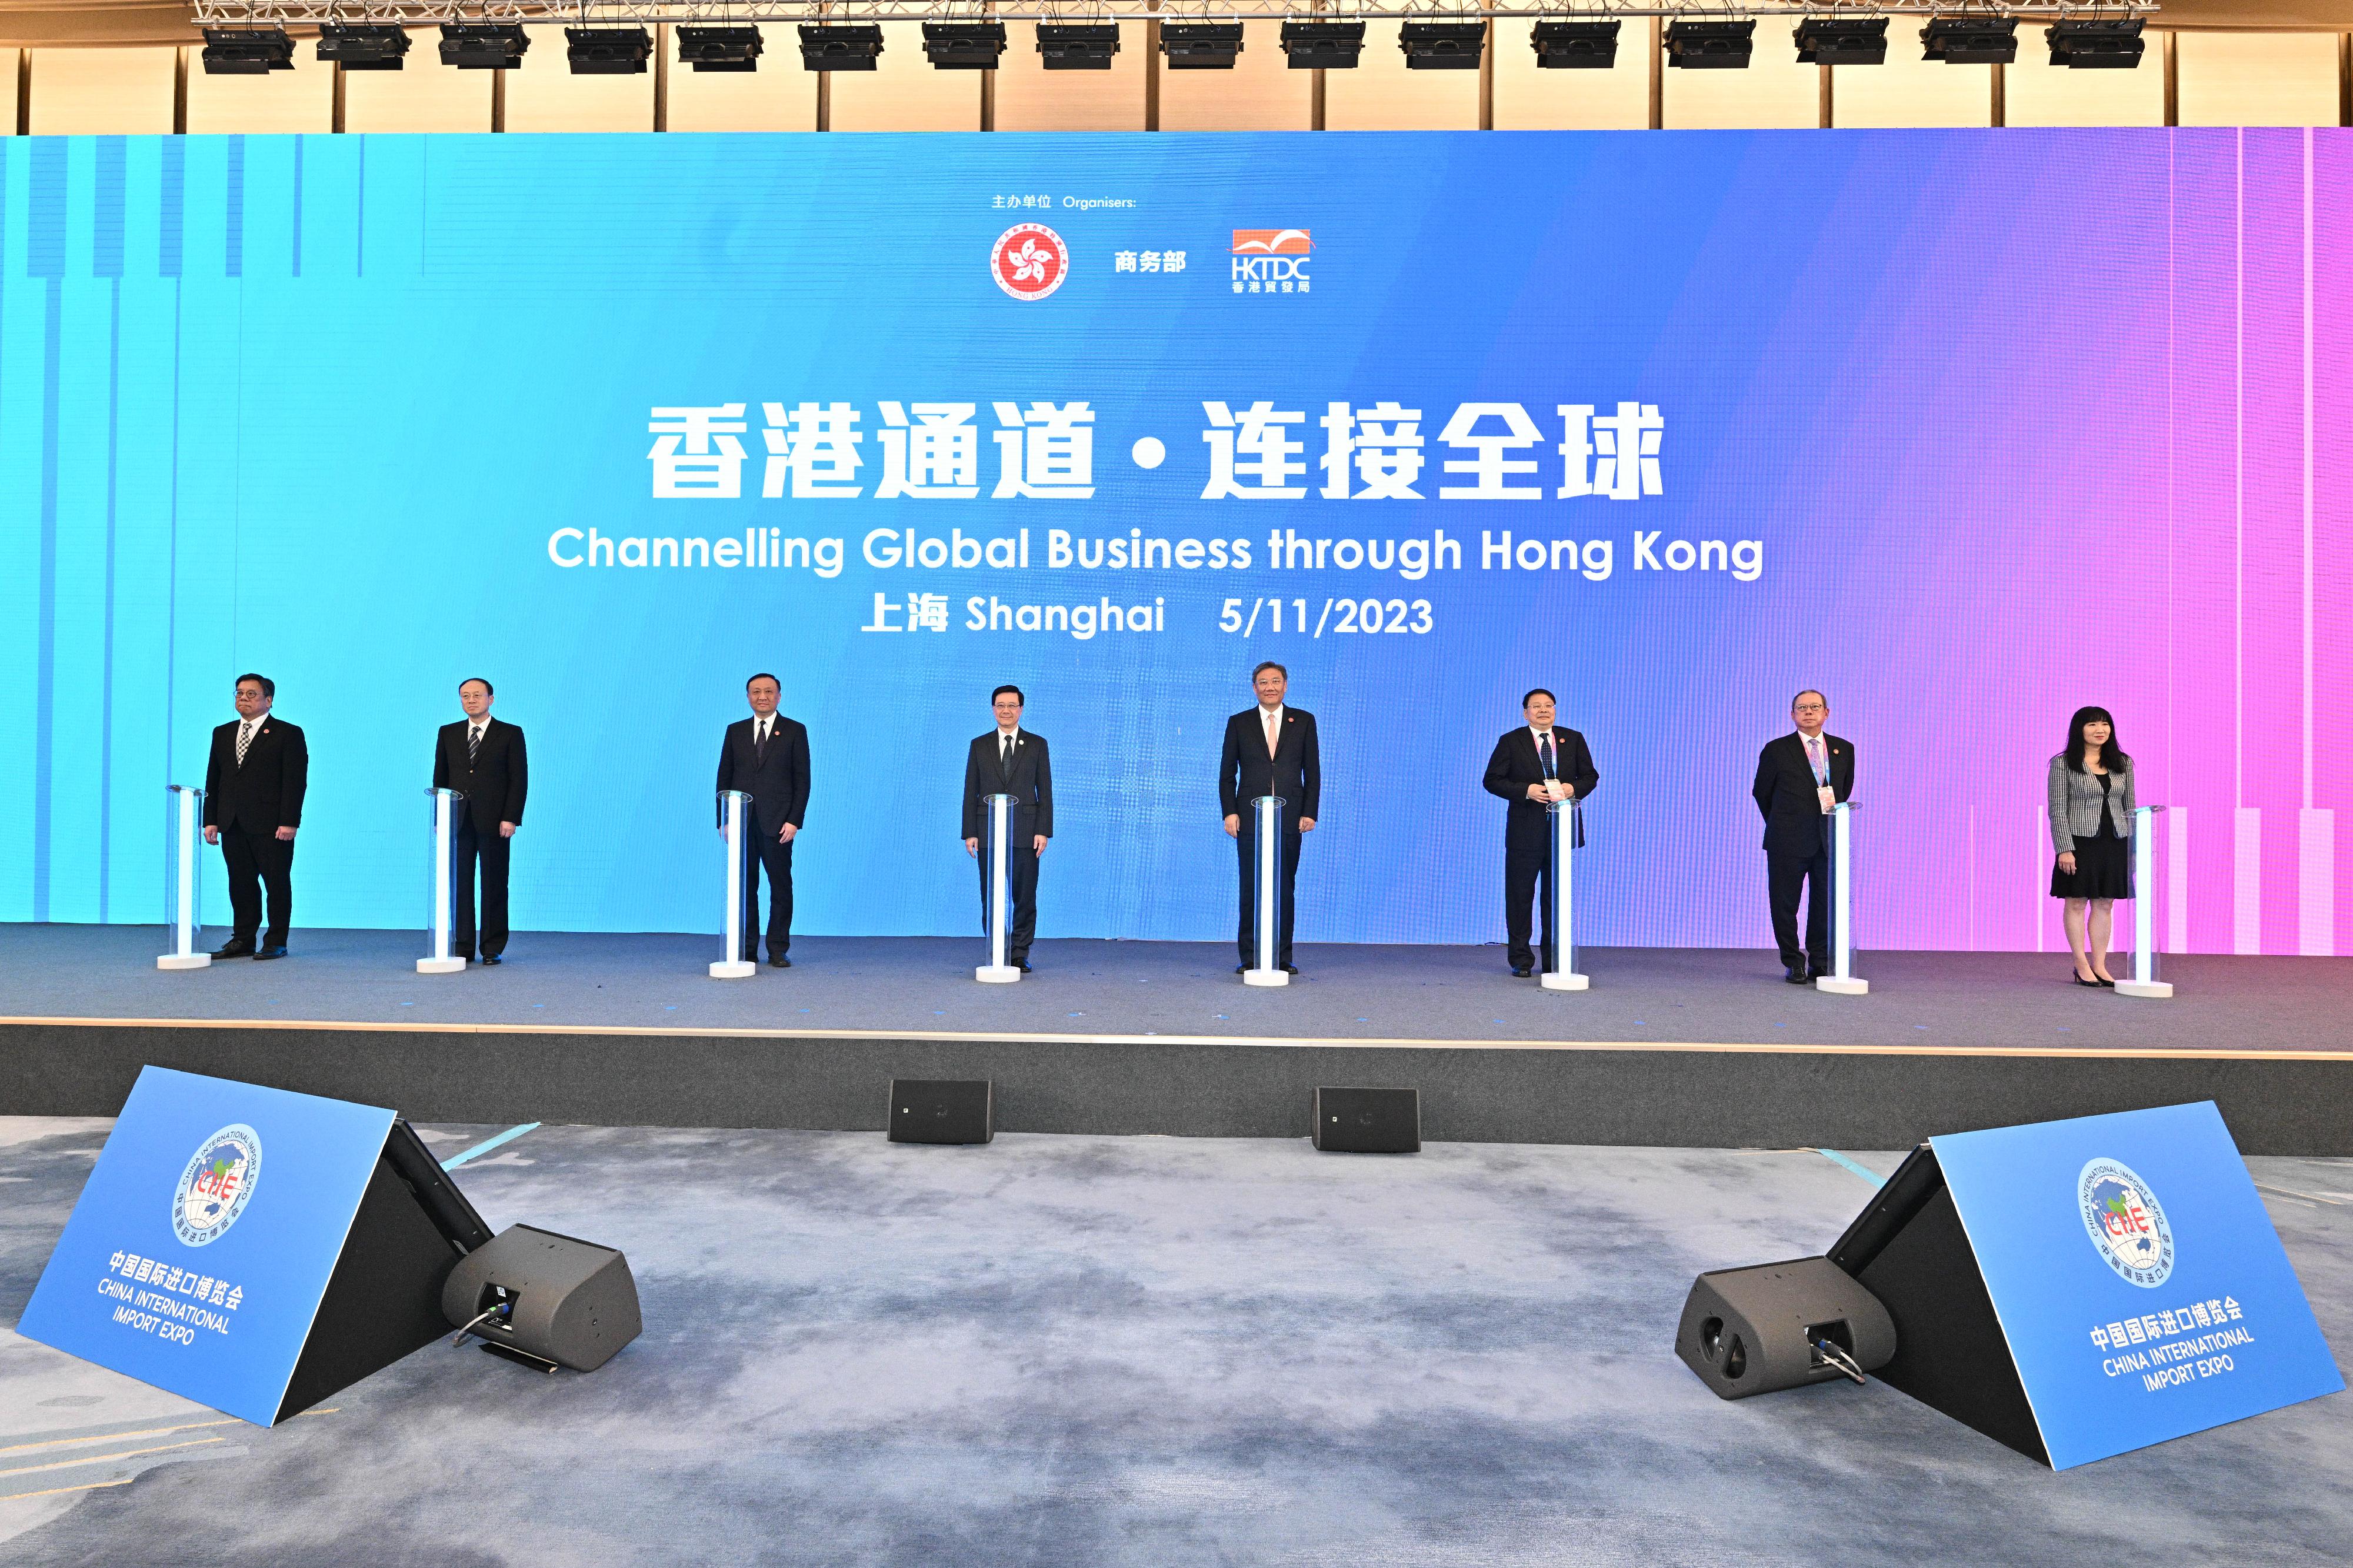 The Chief Executive, Mr John Lee, attended the parallel session on Channelling Global Business through Hong Kong under the sixth Hongqiao International Economic Forum in Shanghai this afternoon (November 5). Photo shows Mr Lee (fourth left); the Minister of Commerce, Mr Wang Wentao (fourth right); Vice Mayor of the Shanghai Municipal Government Mr Hua Yuan (third left); Deputy Director of the Liaison Office of the Central People's Government in the Hong Kong Special Administrative Region Mr Yin Zonghua (third right); the Secretary for Commerce and Economic Development, Mr Algernon Yau (first left); the Chairman of the Hong Kong Trade Development Council (HKTDC), Dr Peter Lam (second right); and the Executive Director of the HKTDC, Ms Margaret Fong (first right), officiating at the parallel session.